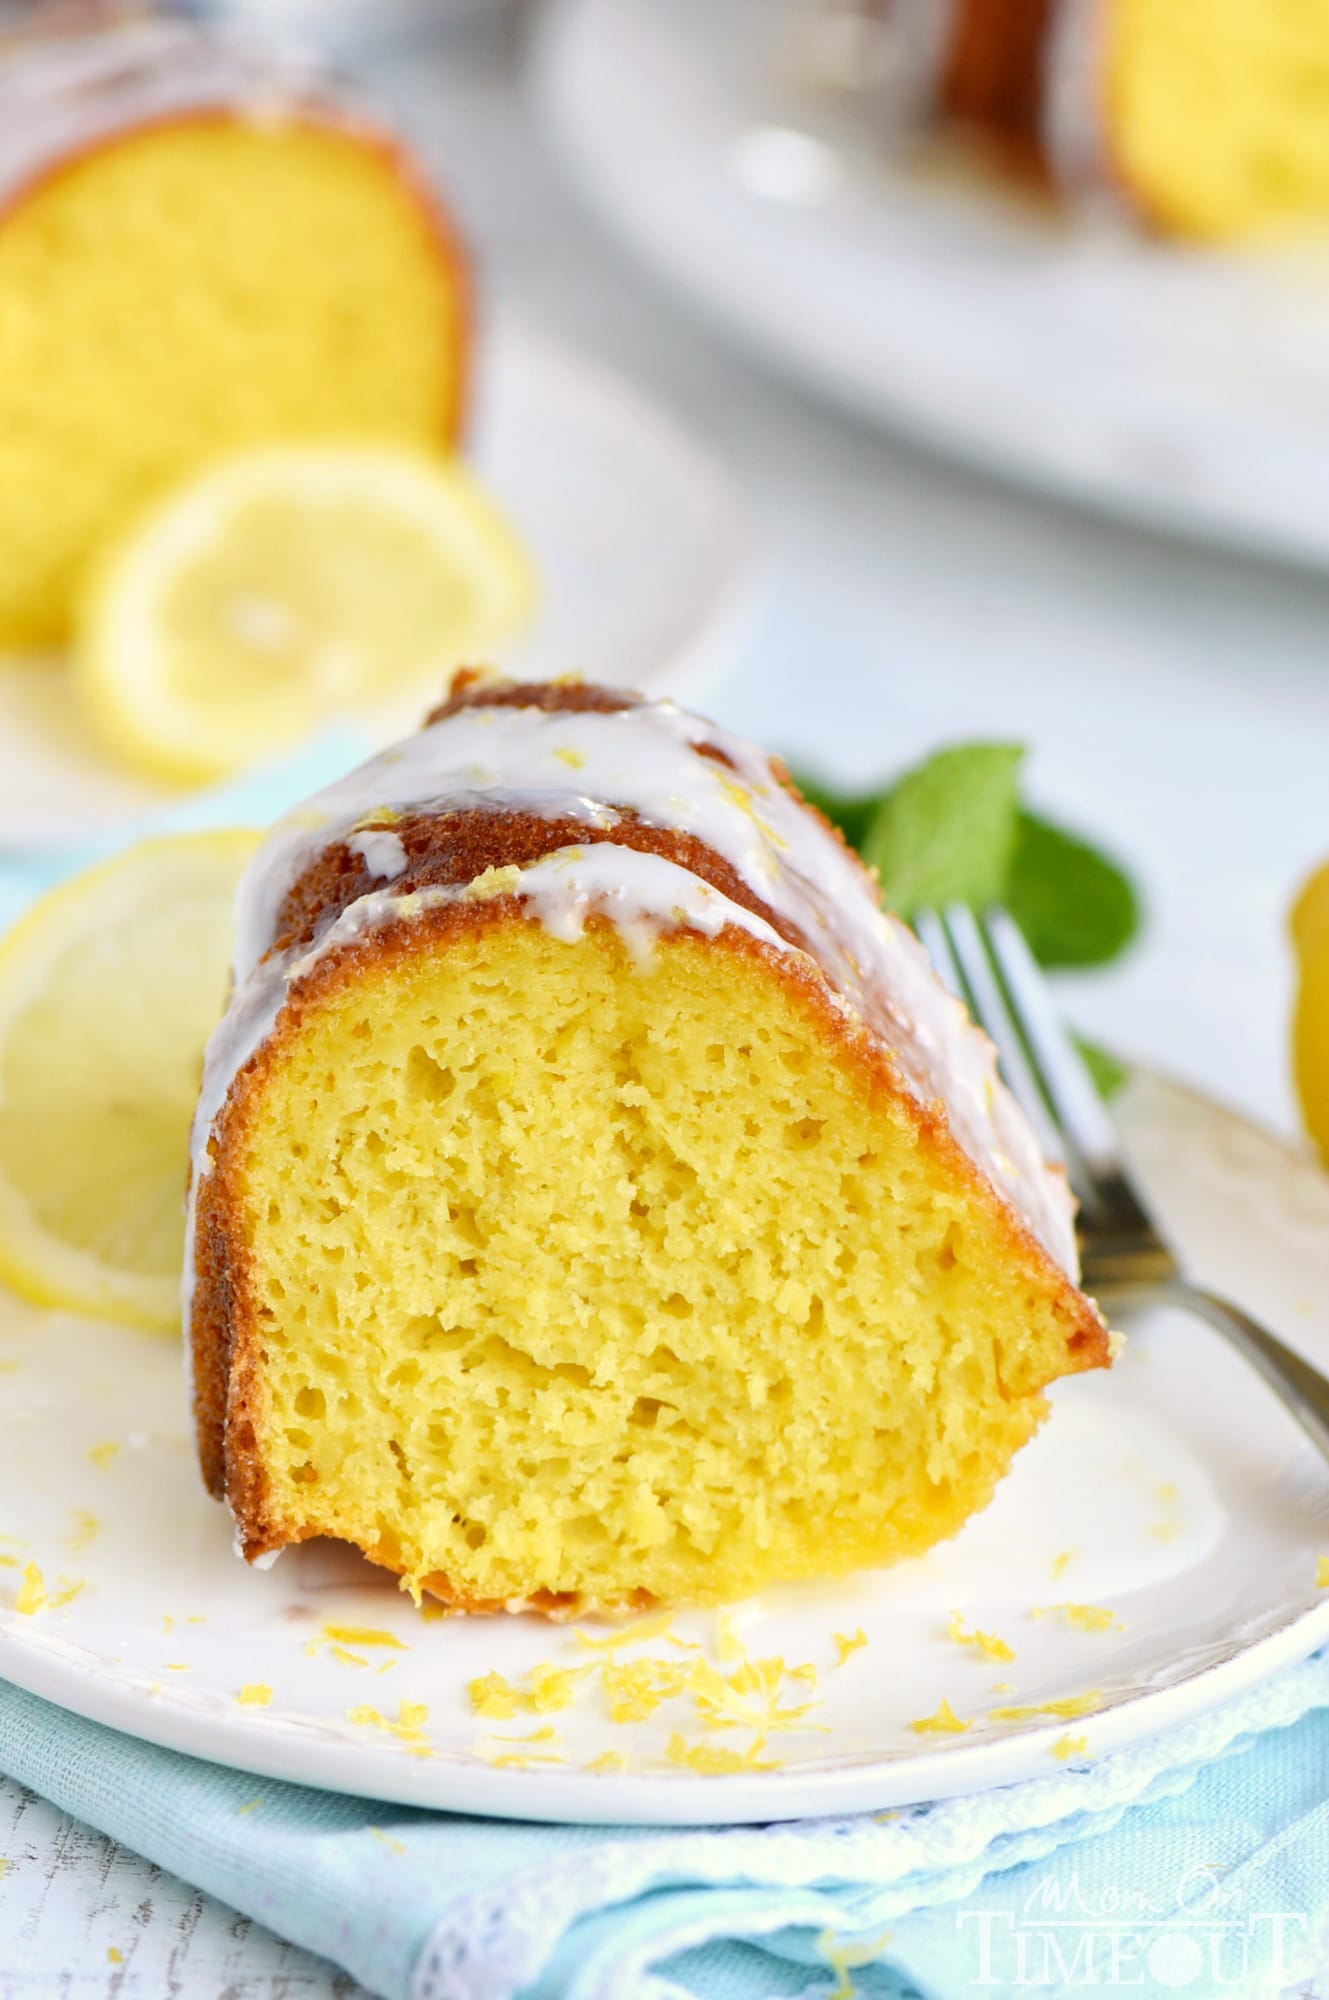 Looking for an easy lemon dessert recipe that is going to WOW your friends and family? This Easy Lemon Bundt Cake is the answer! A breeze to make and loaded with bright lemon flavor, this easy cake recipe is also figure-friendly which makes it perfect for summer! // Mom On Timeout